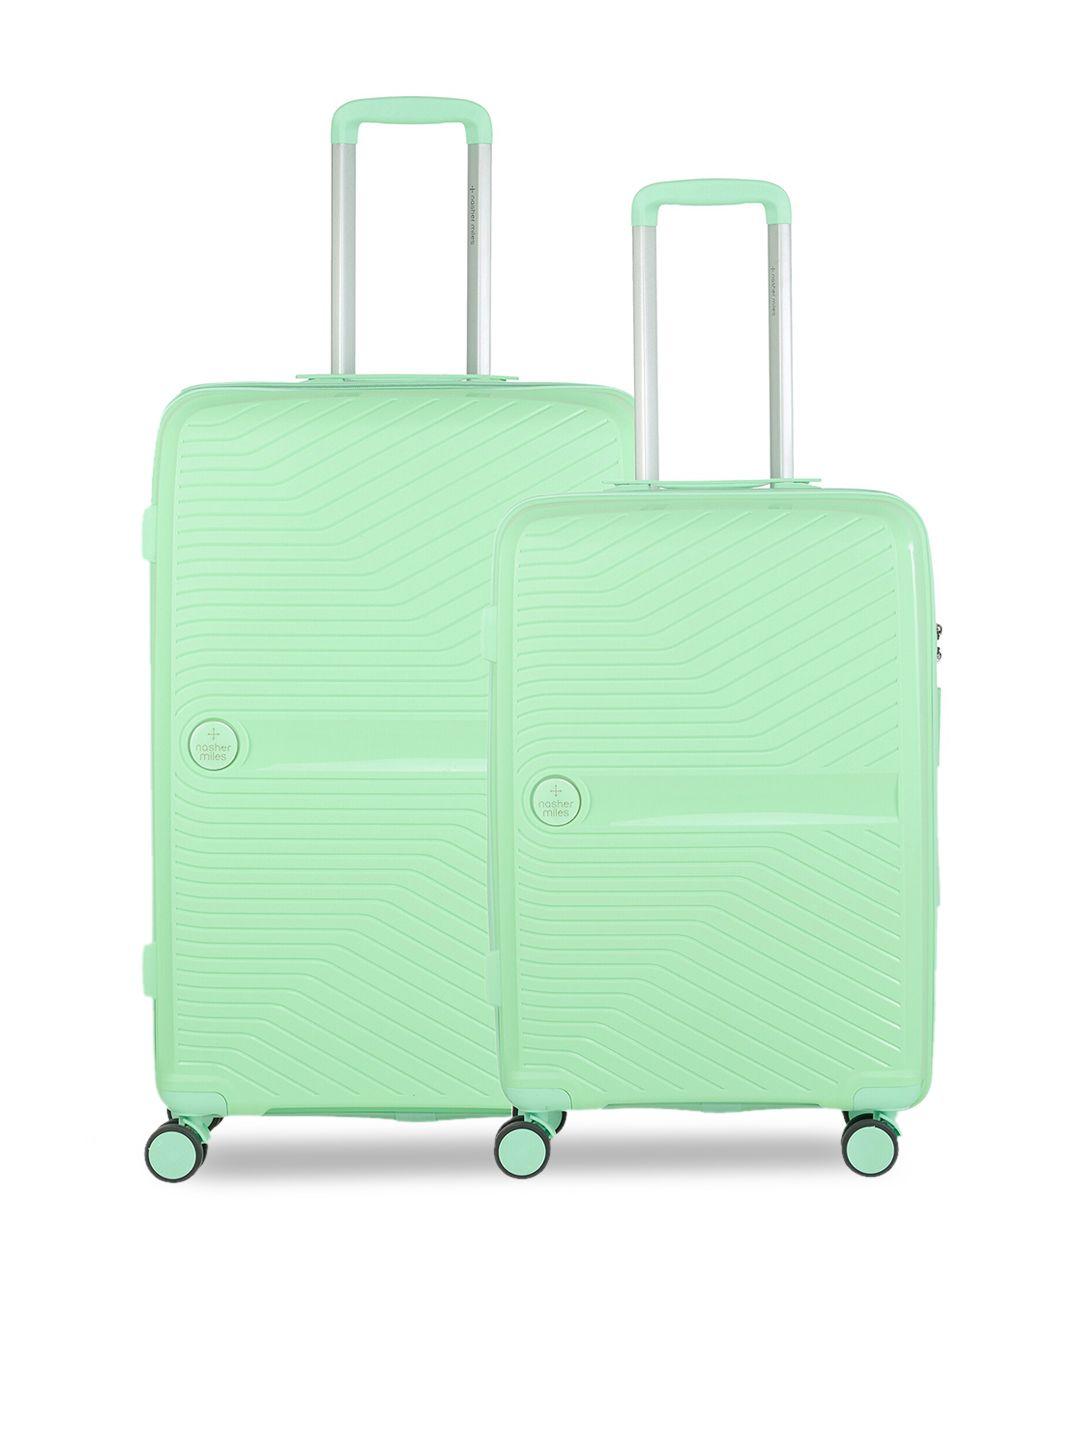 nasher miles set of 2 textured hard-sided trolley bags